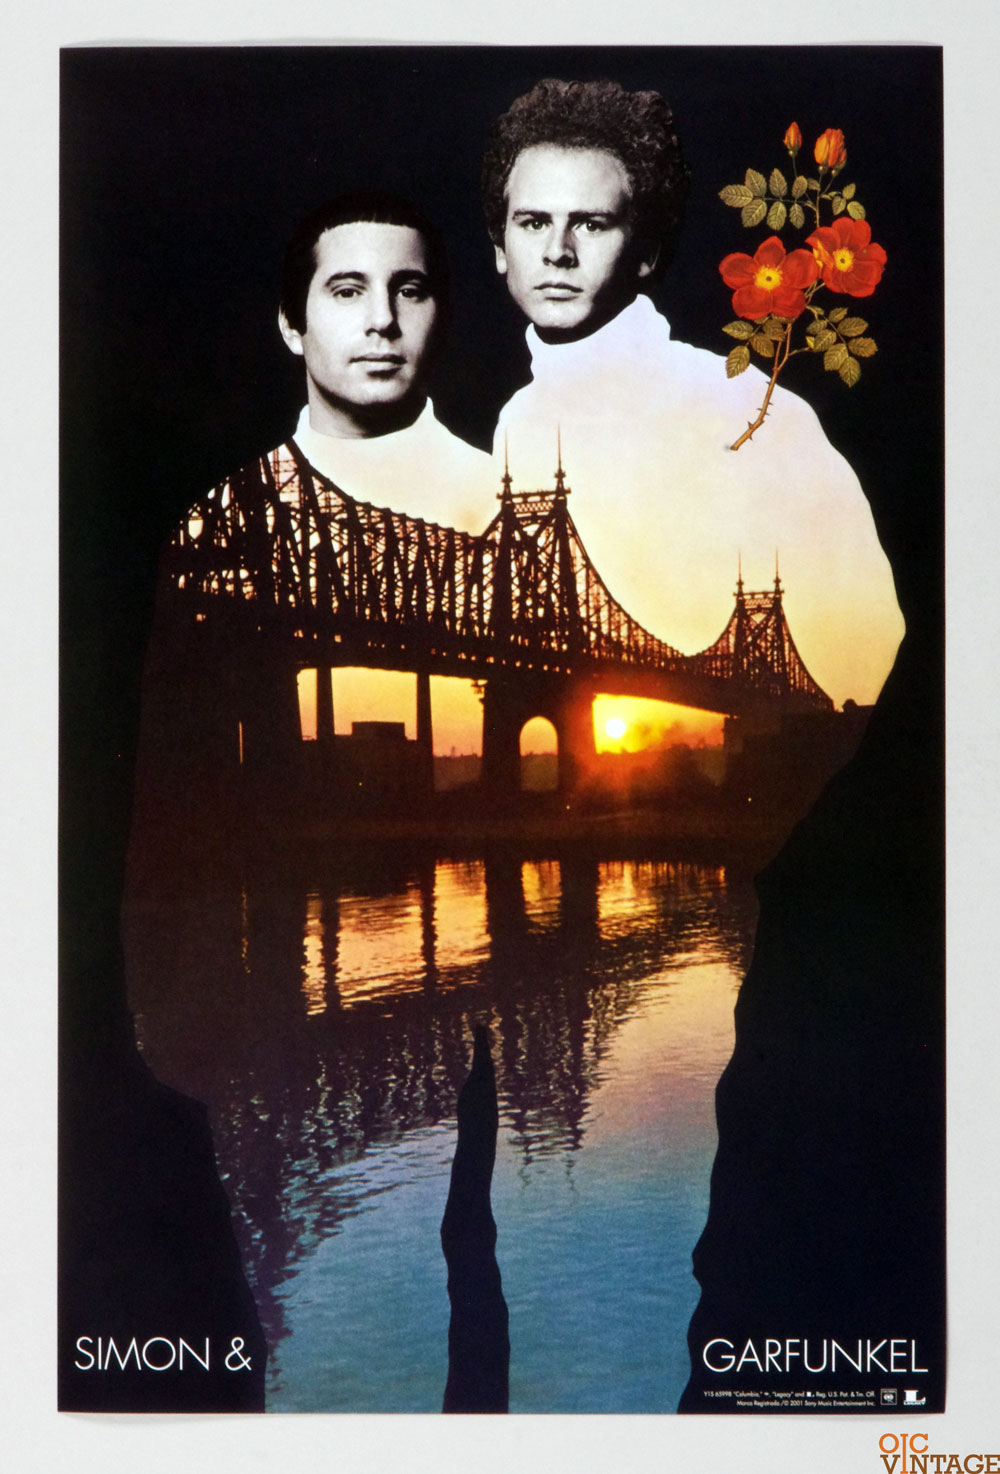 Simon and Garfunkel Poster 2001 CD Set Release Promotion Columbia Records